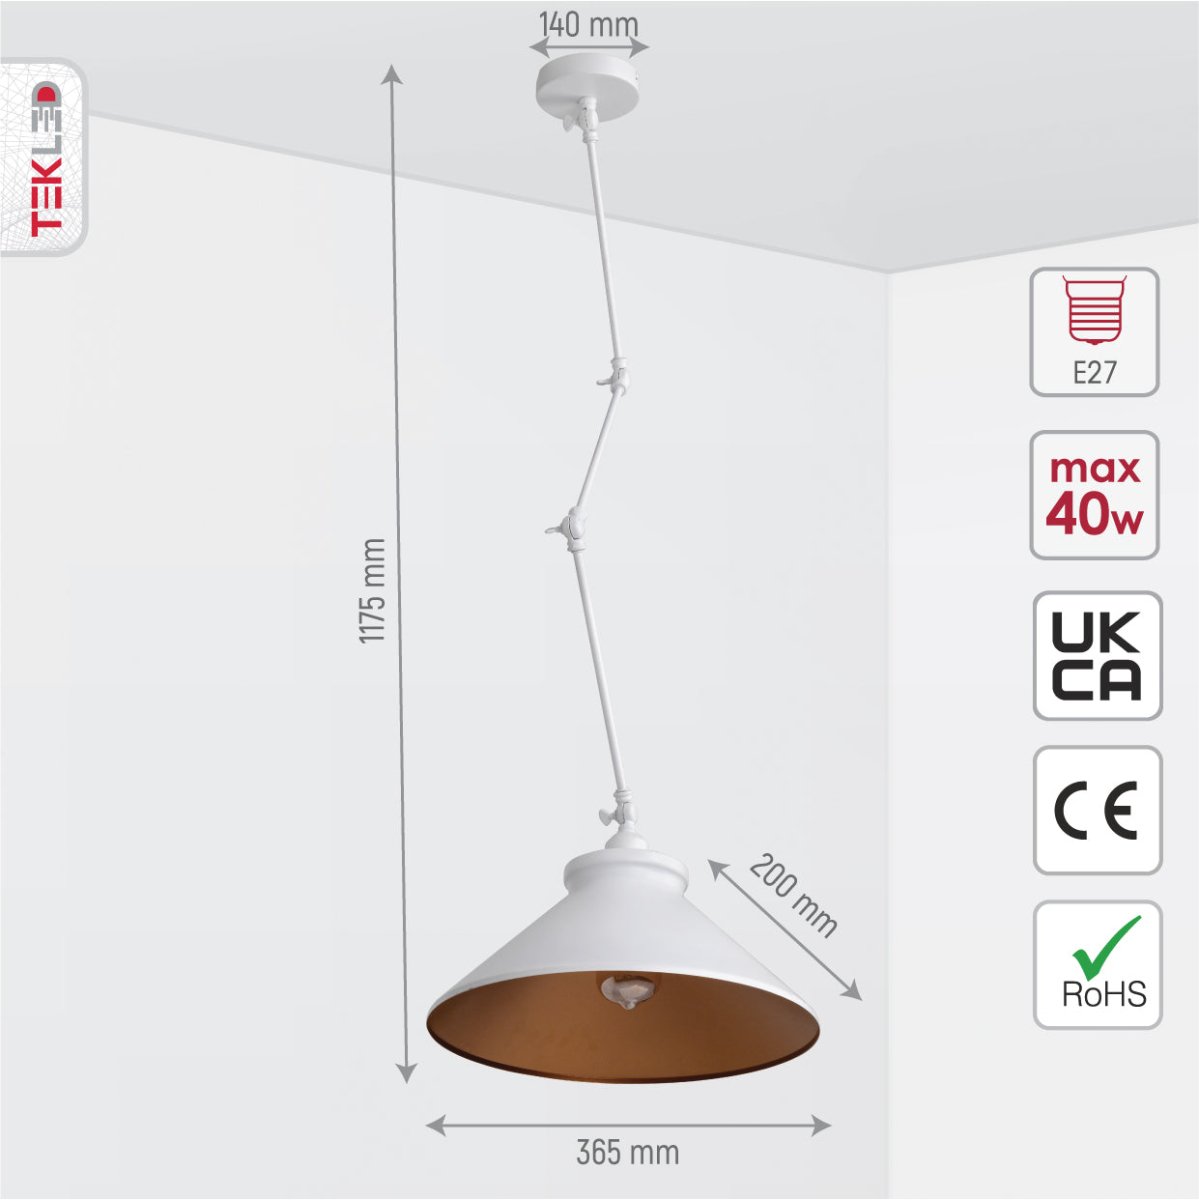 Size and specs of White Metal Hinged Funnel Ceiling Light with E27 Fitting | TEKLED 159-17042